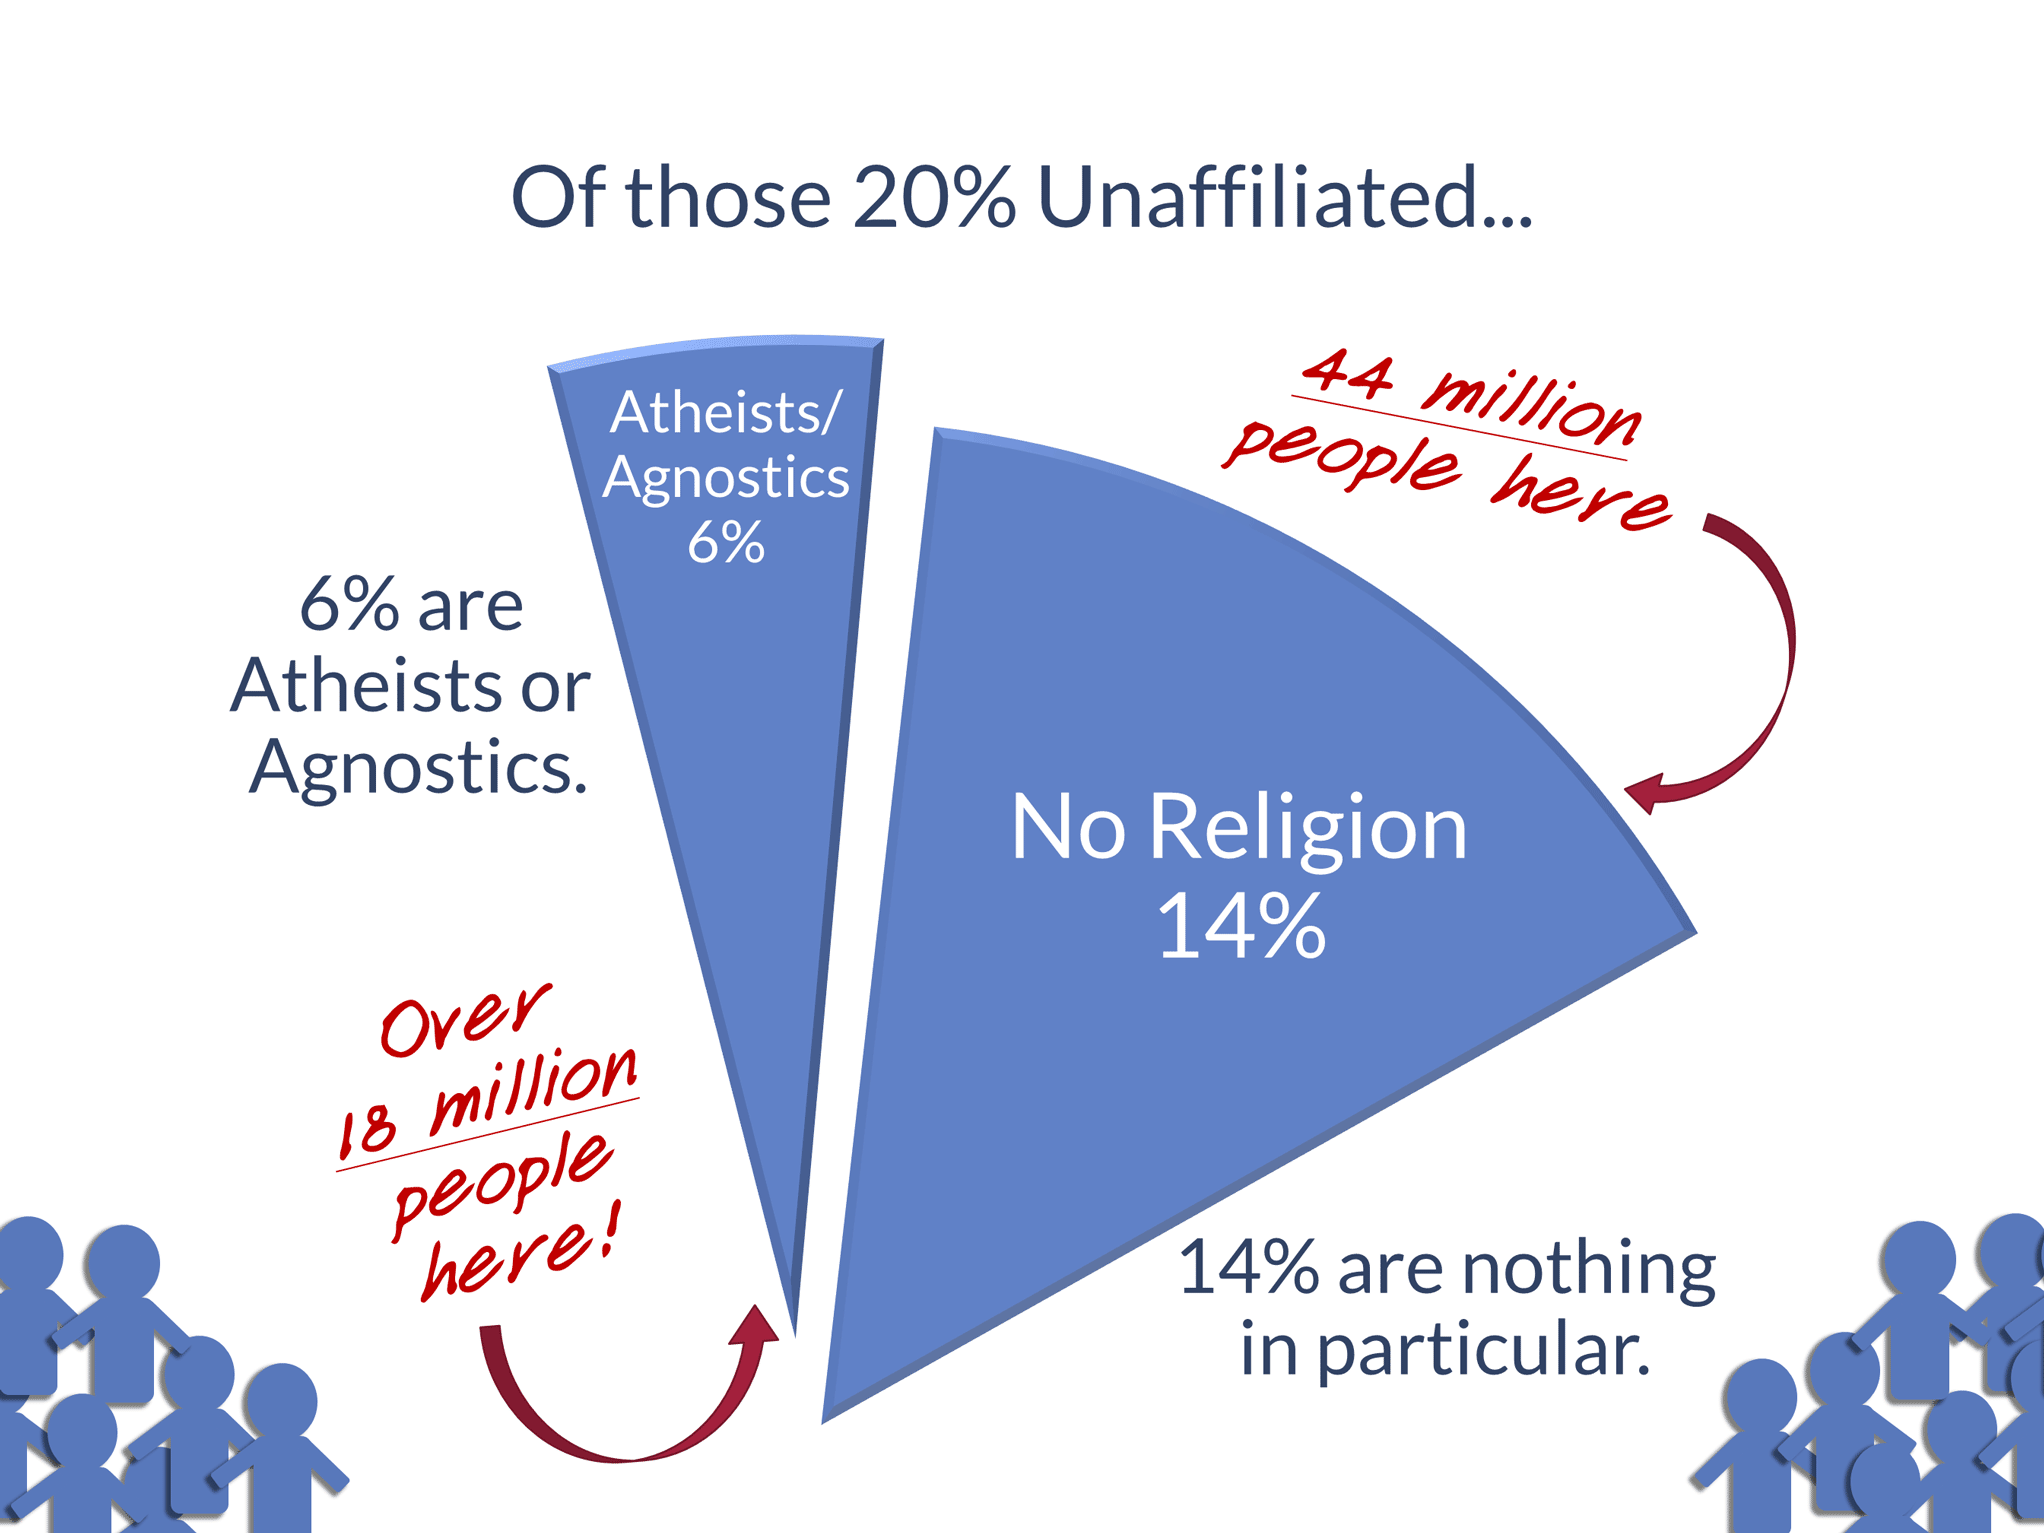 Of those 20% Unaffiliated, 6% are Atheists or Agnostics. (Over 18 million people!) 14% are nothing in particular. (44 million people)